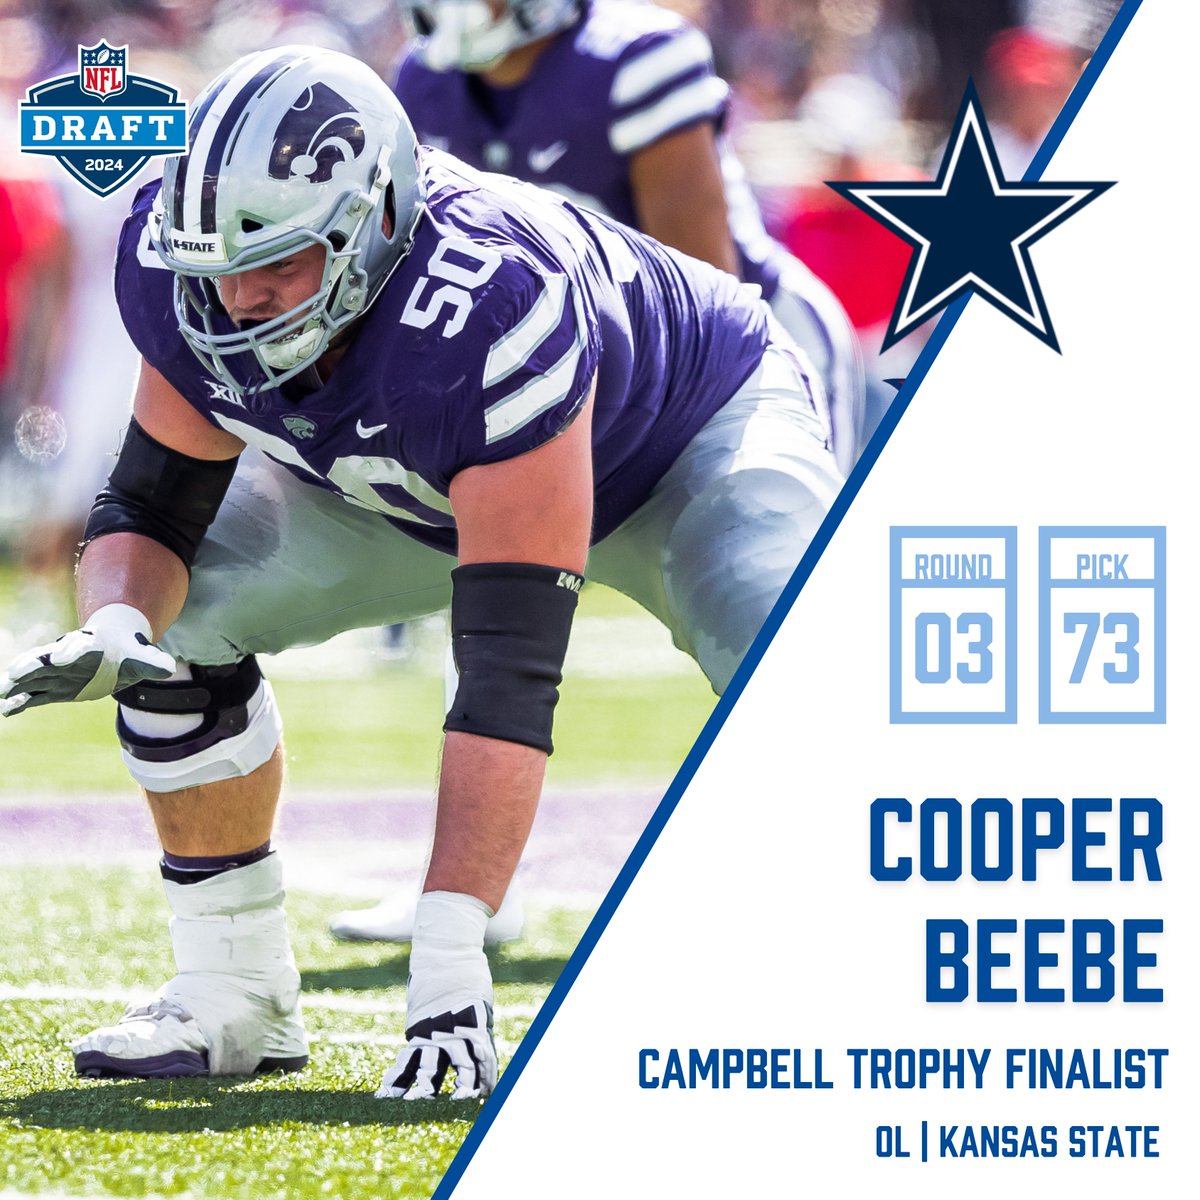 HOW 'BOUT THAT COOPER BEEBE! Congrats on getting drafted by the Cowboys!